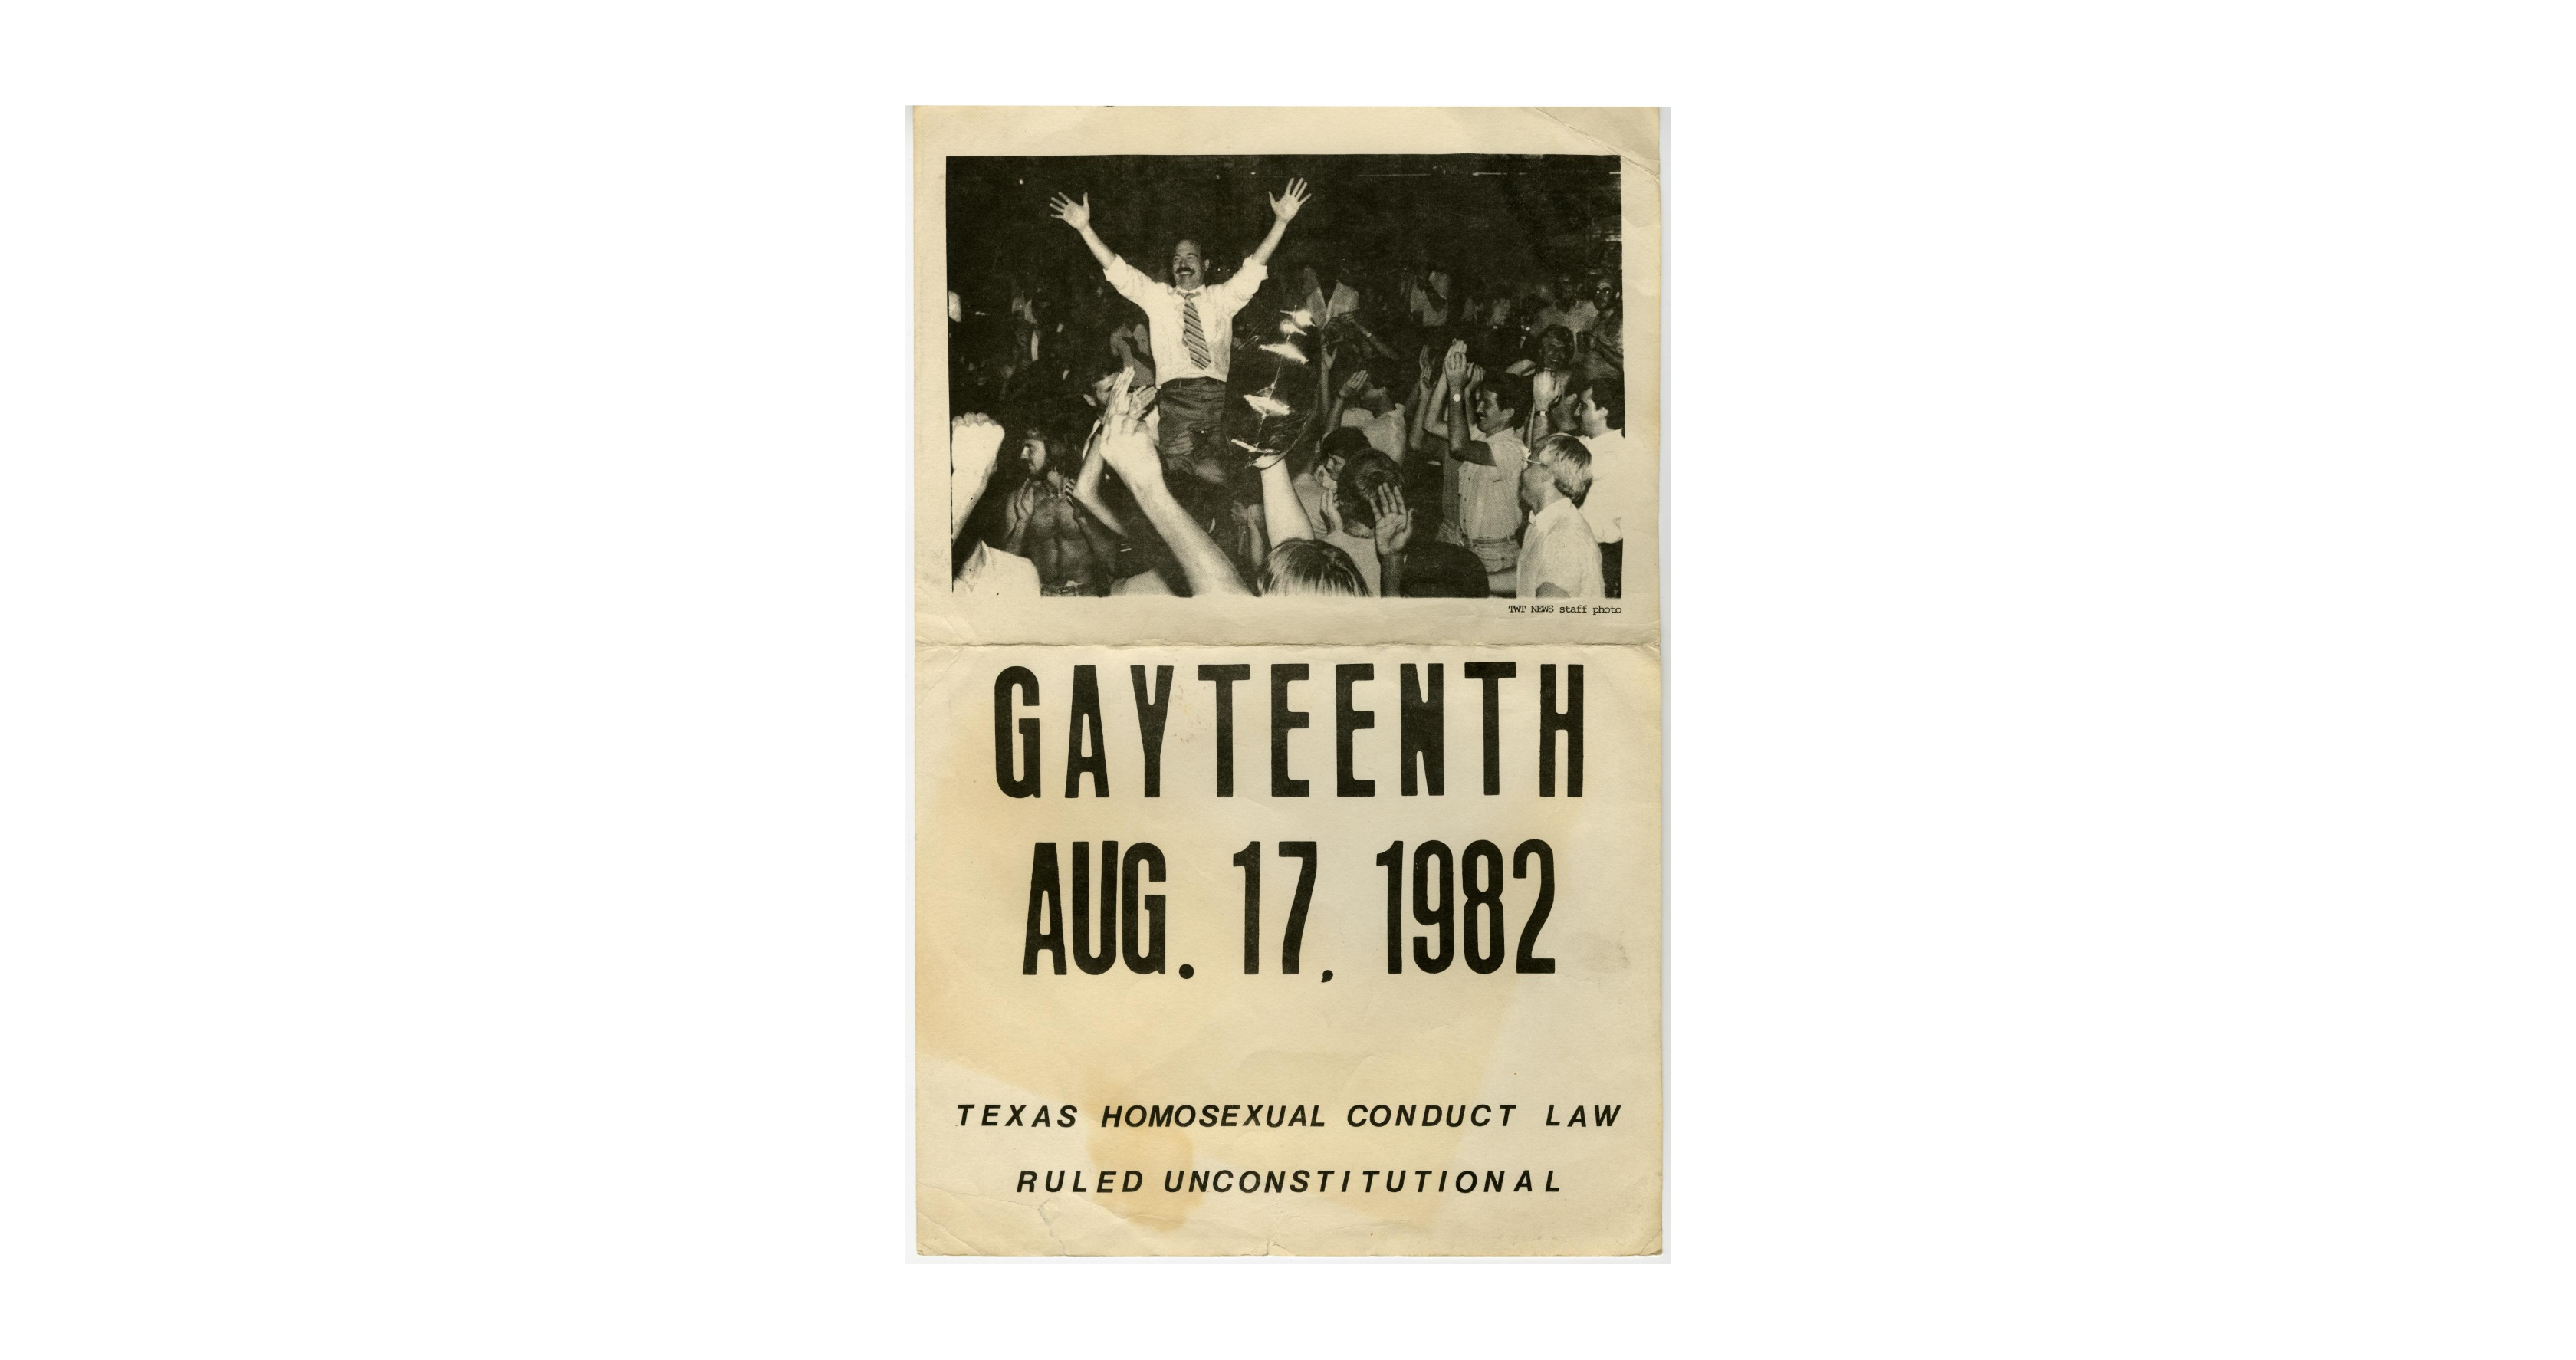 An old poster shows Don Baker, a white man in a tie and button down, holding his arms in a victory pose as he stands at the center of a crowd. The poster text reads "Gayteenth Aug 17 1982 Texas Homosexual Conduct Law Ruled Unconstitutional".